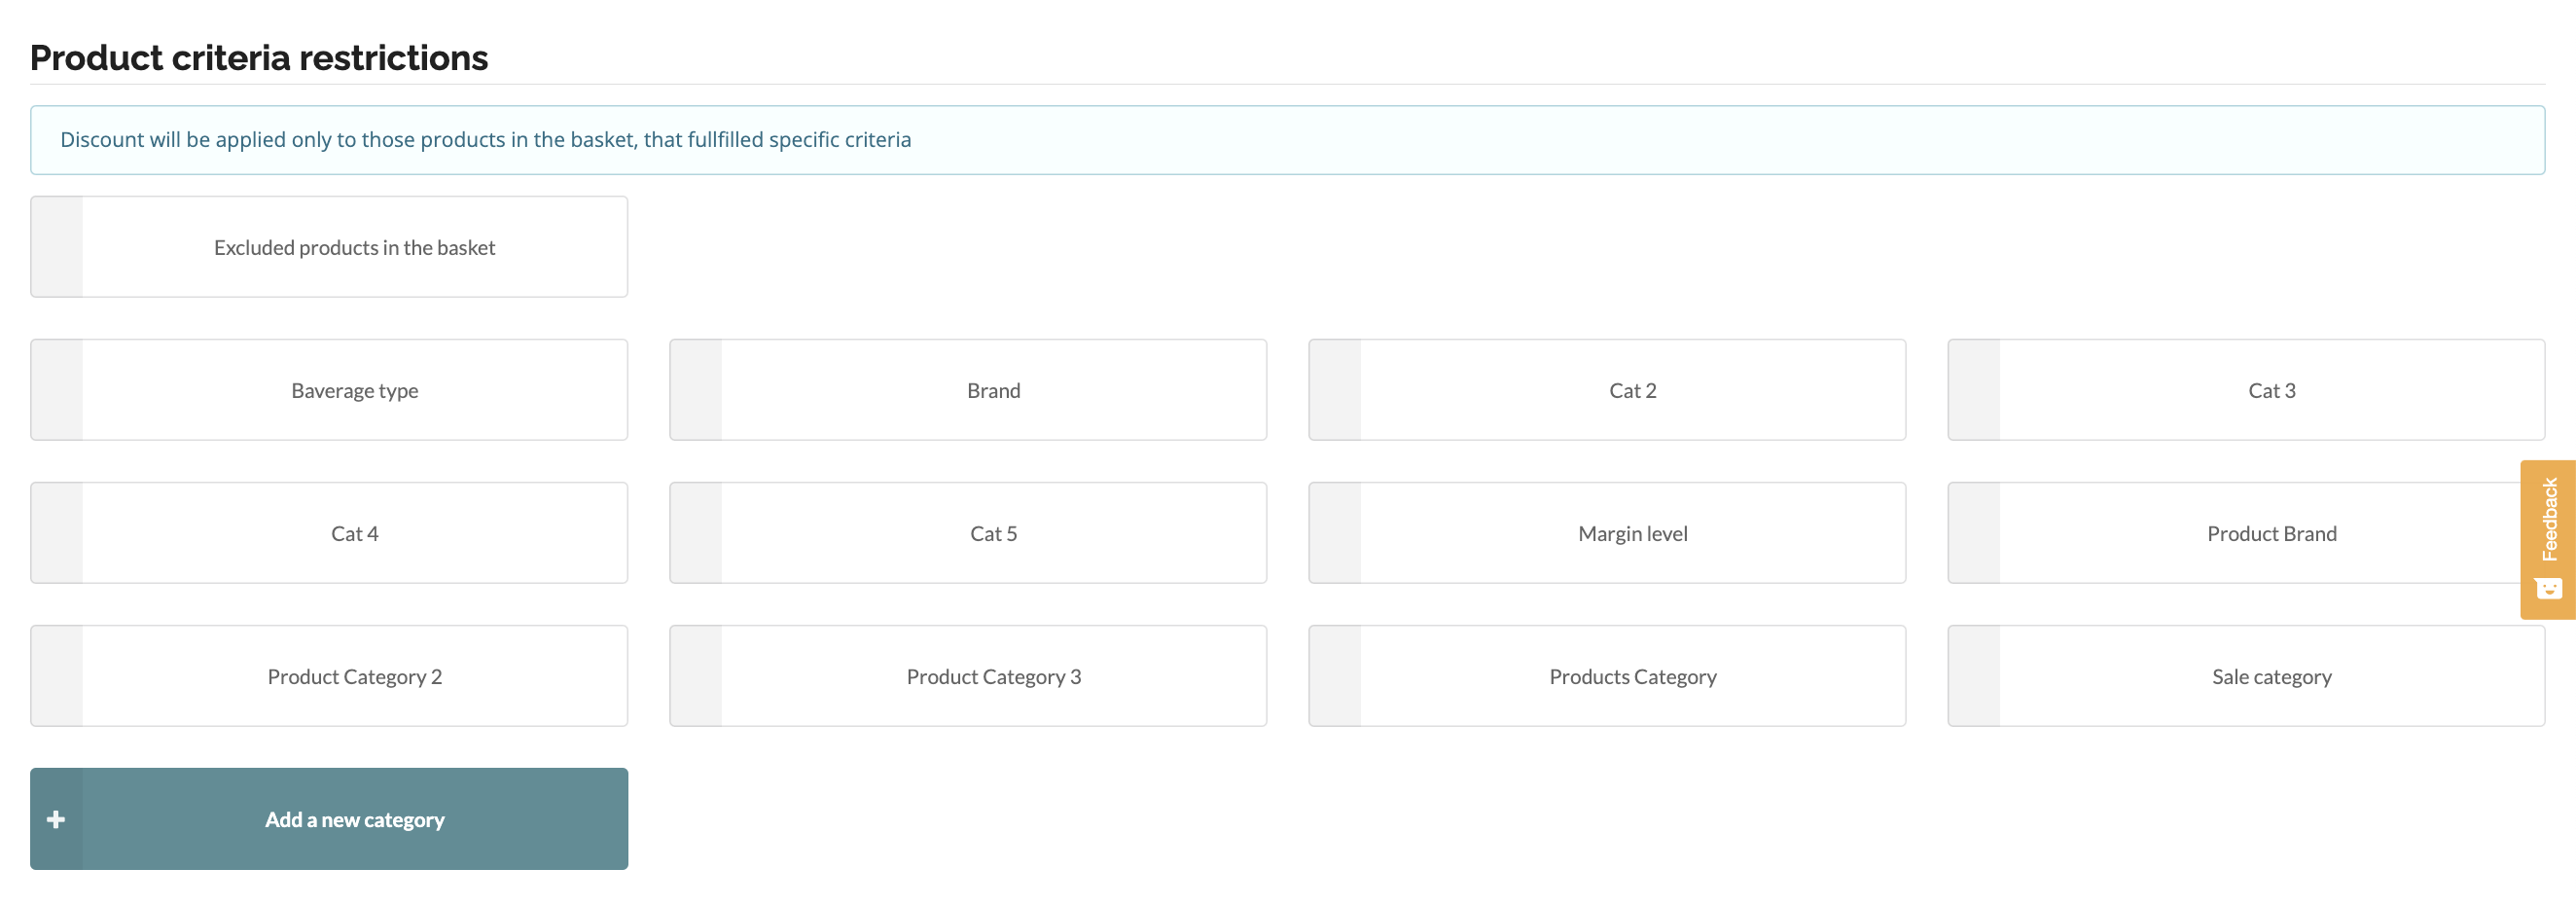 Product criteria restrictions on Vouchery.io